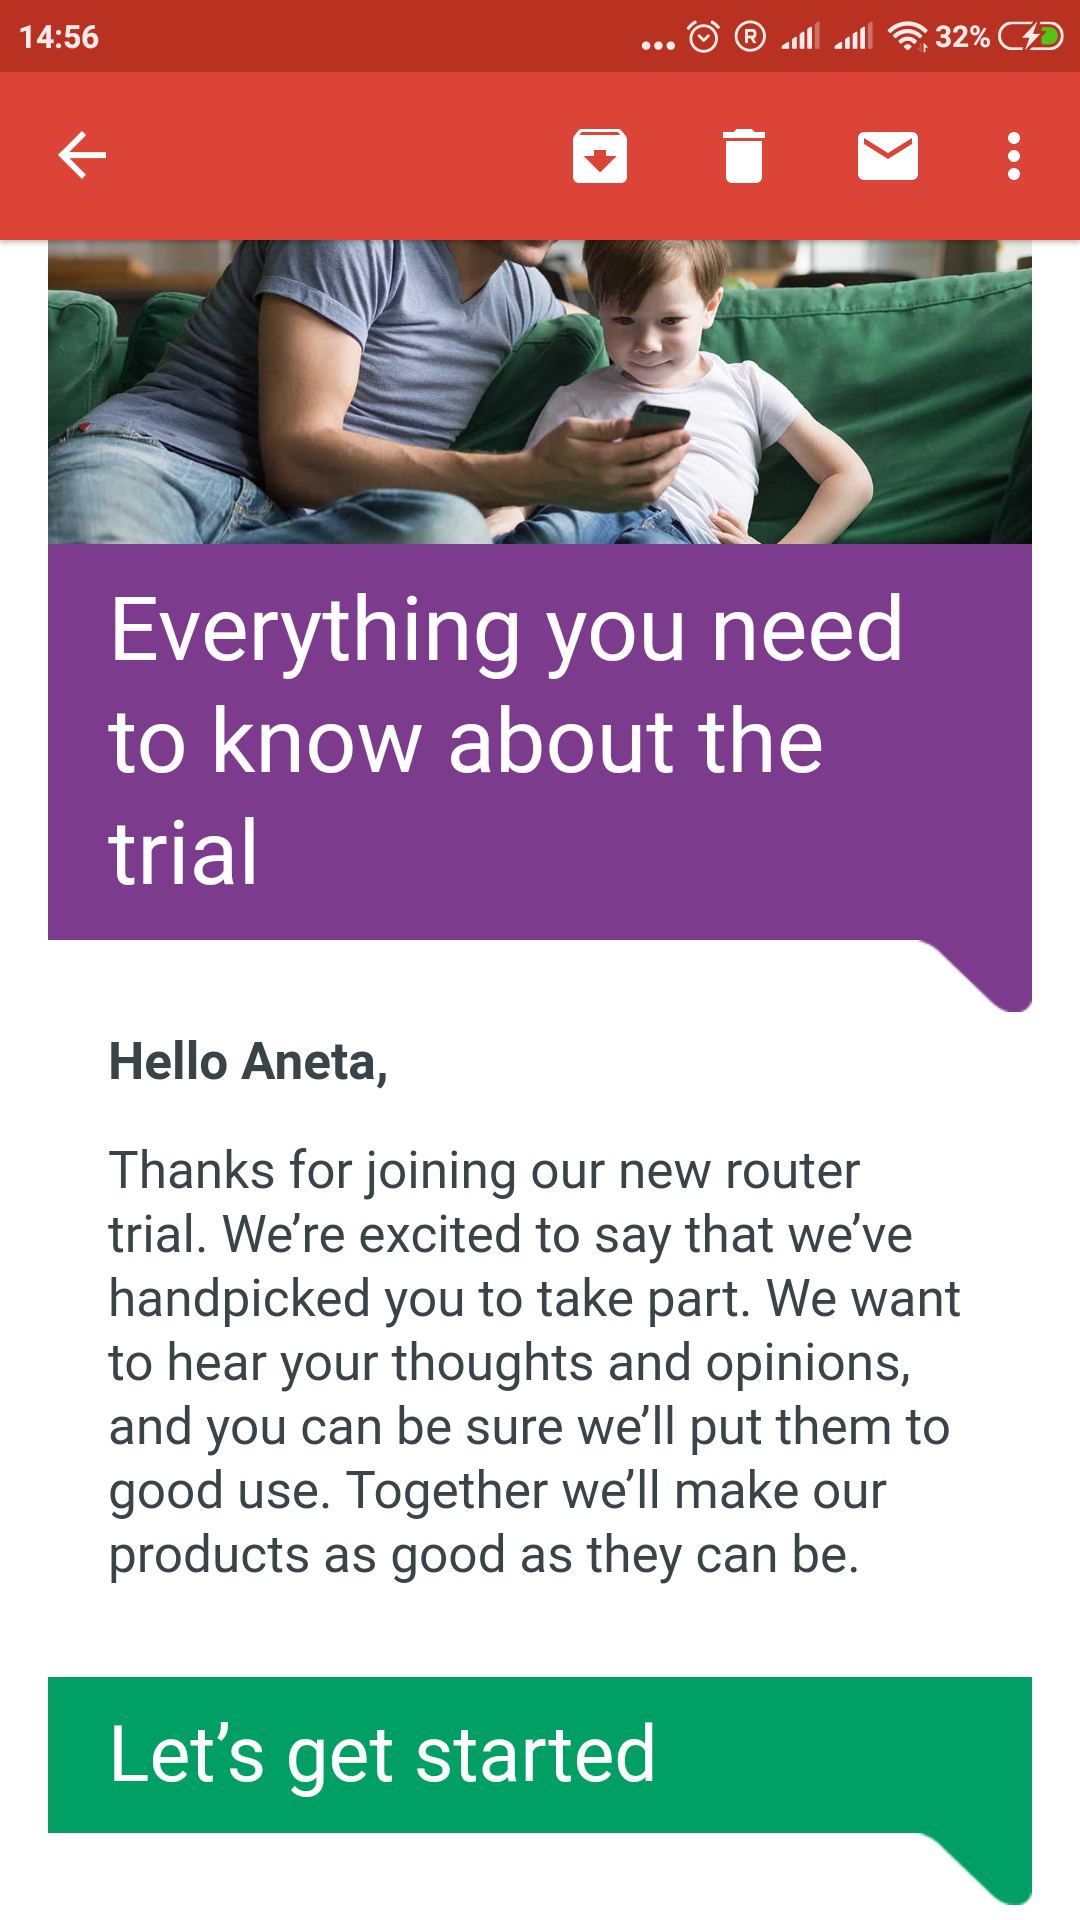 Trial Router Survey Email Talktalk Help And Support